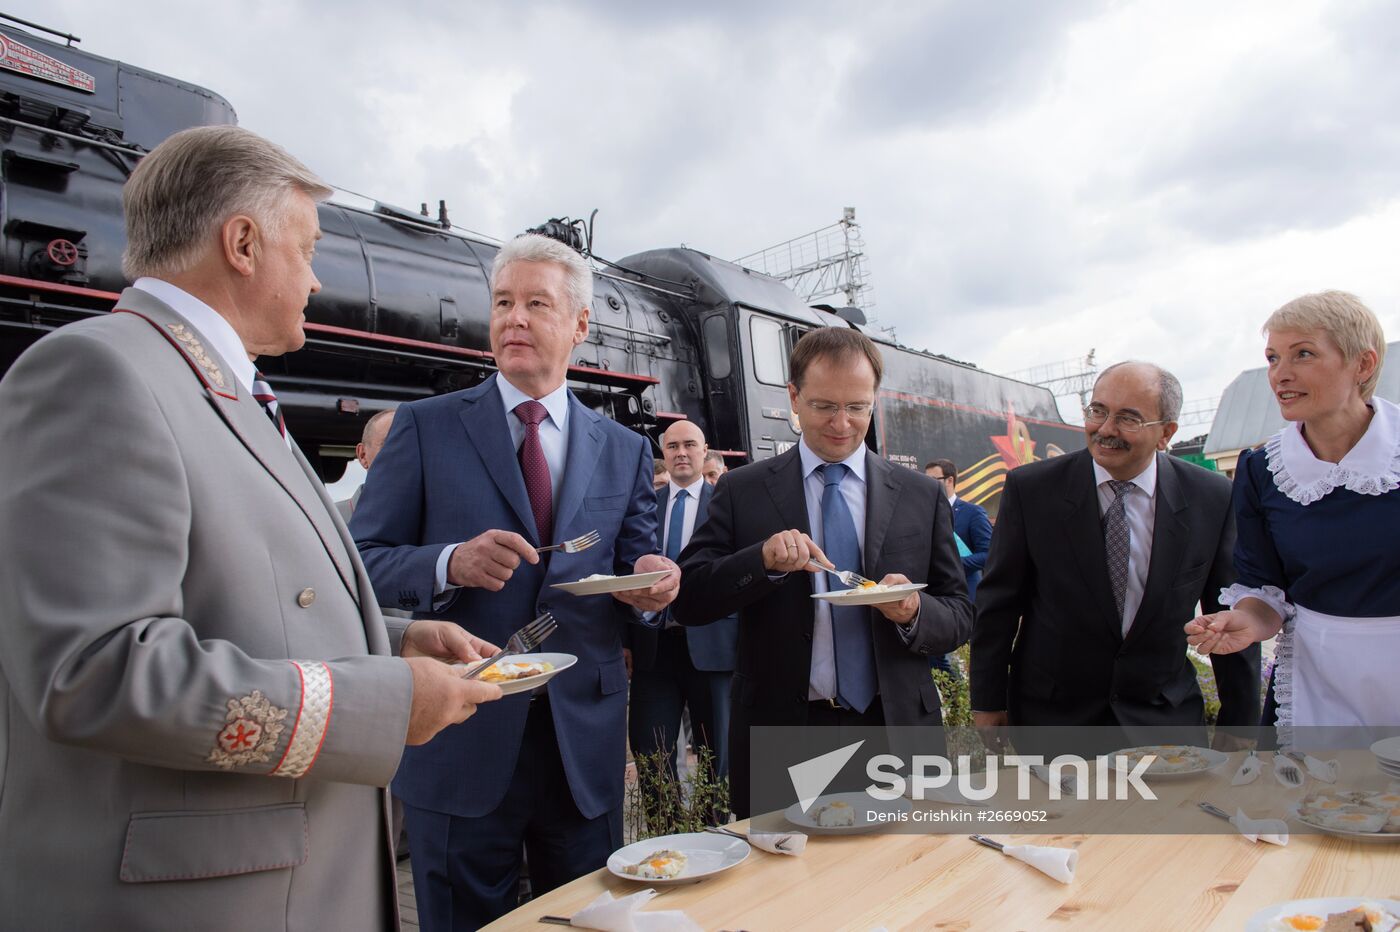 Opening of Moscow Railroad Museum and Production Complex